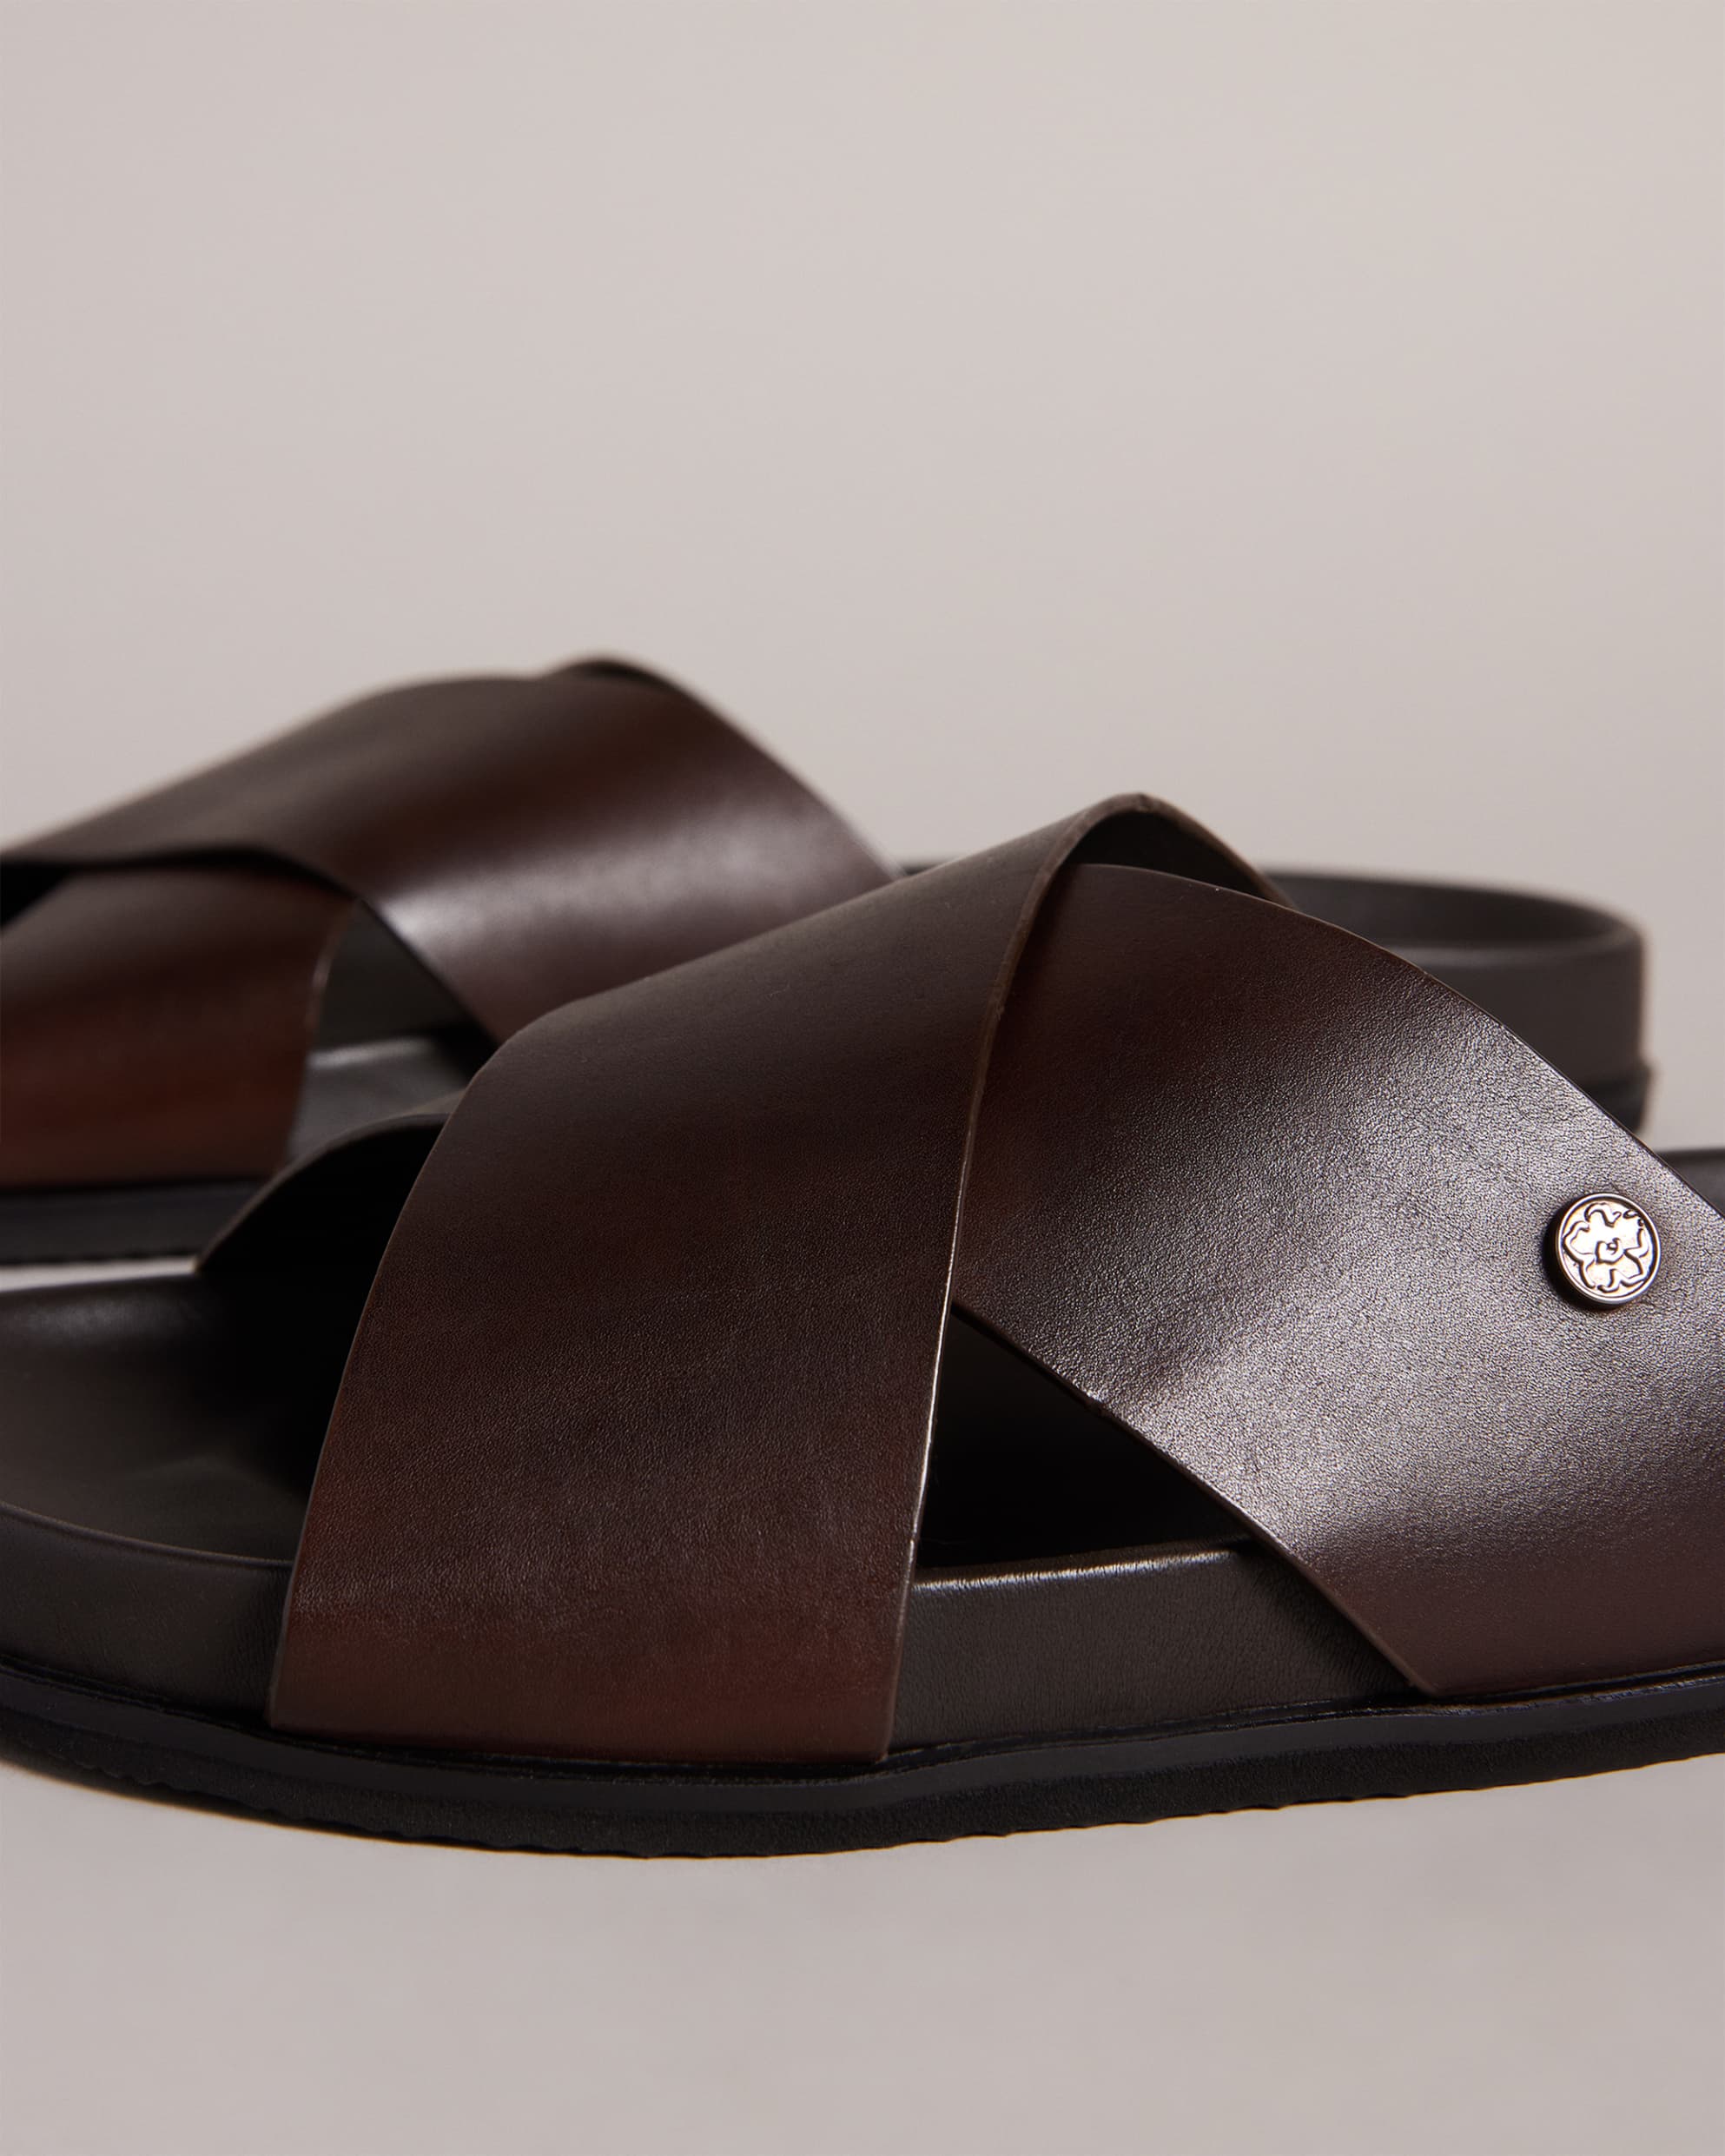 Oscarr Leather Strap Sandals Brown